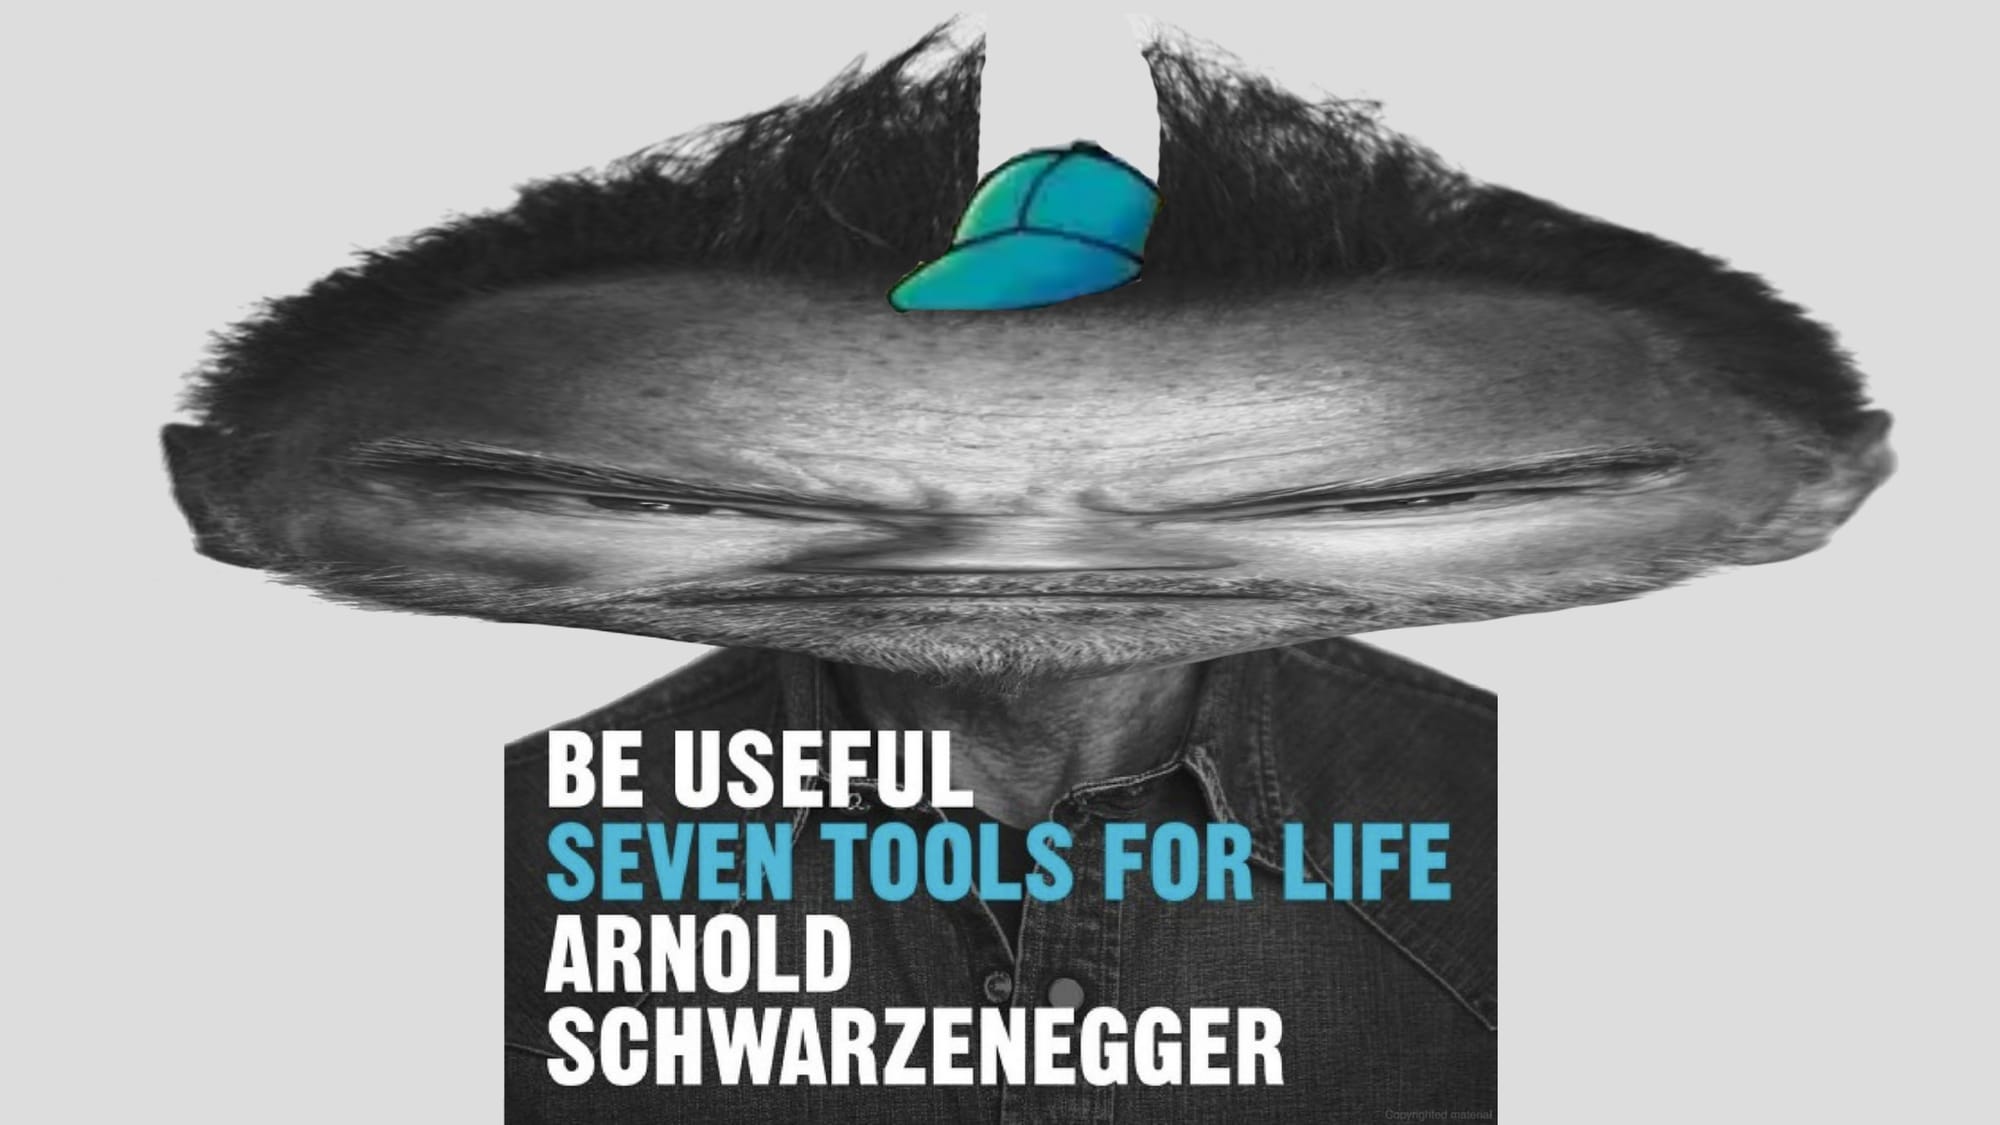 A picture of Arnold Schwarzenegger from the cover of Arnold Schwarzenegger's book "Be Useful: Seven Tools for Life" 